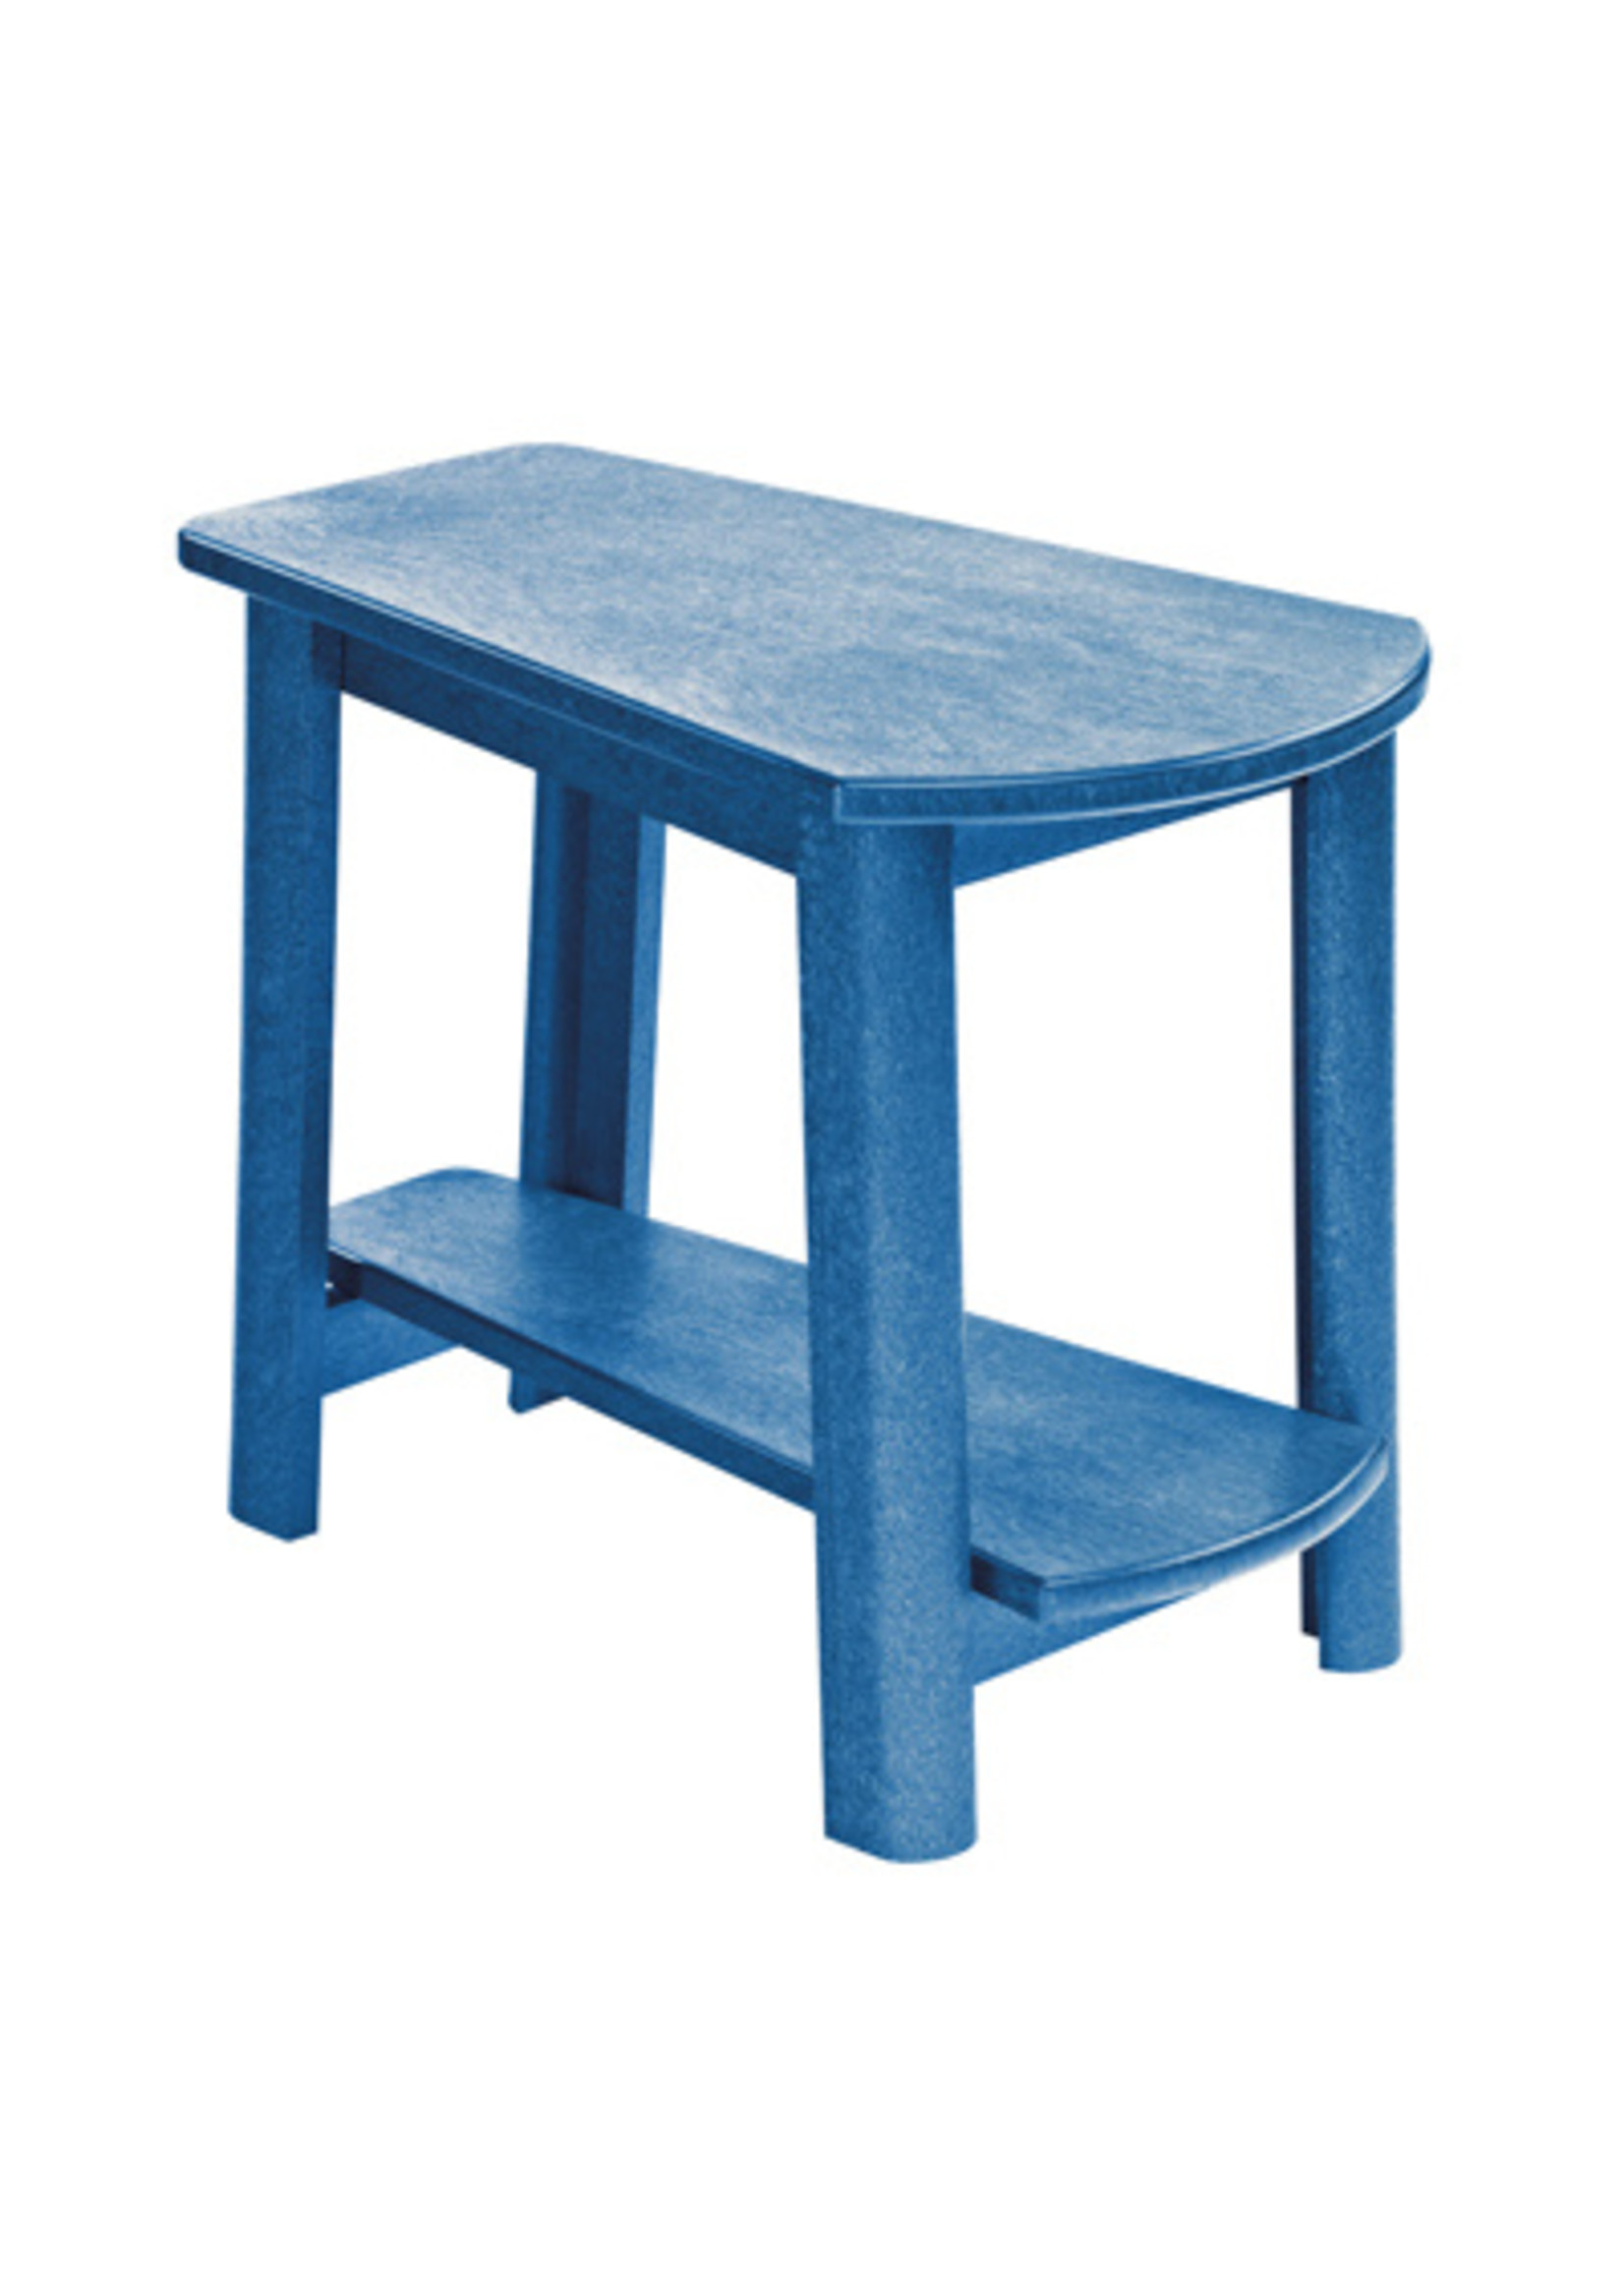 C.R. Plastic Products 181.T04 * Addy Side Table, Generation Line